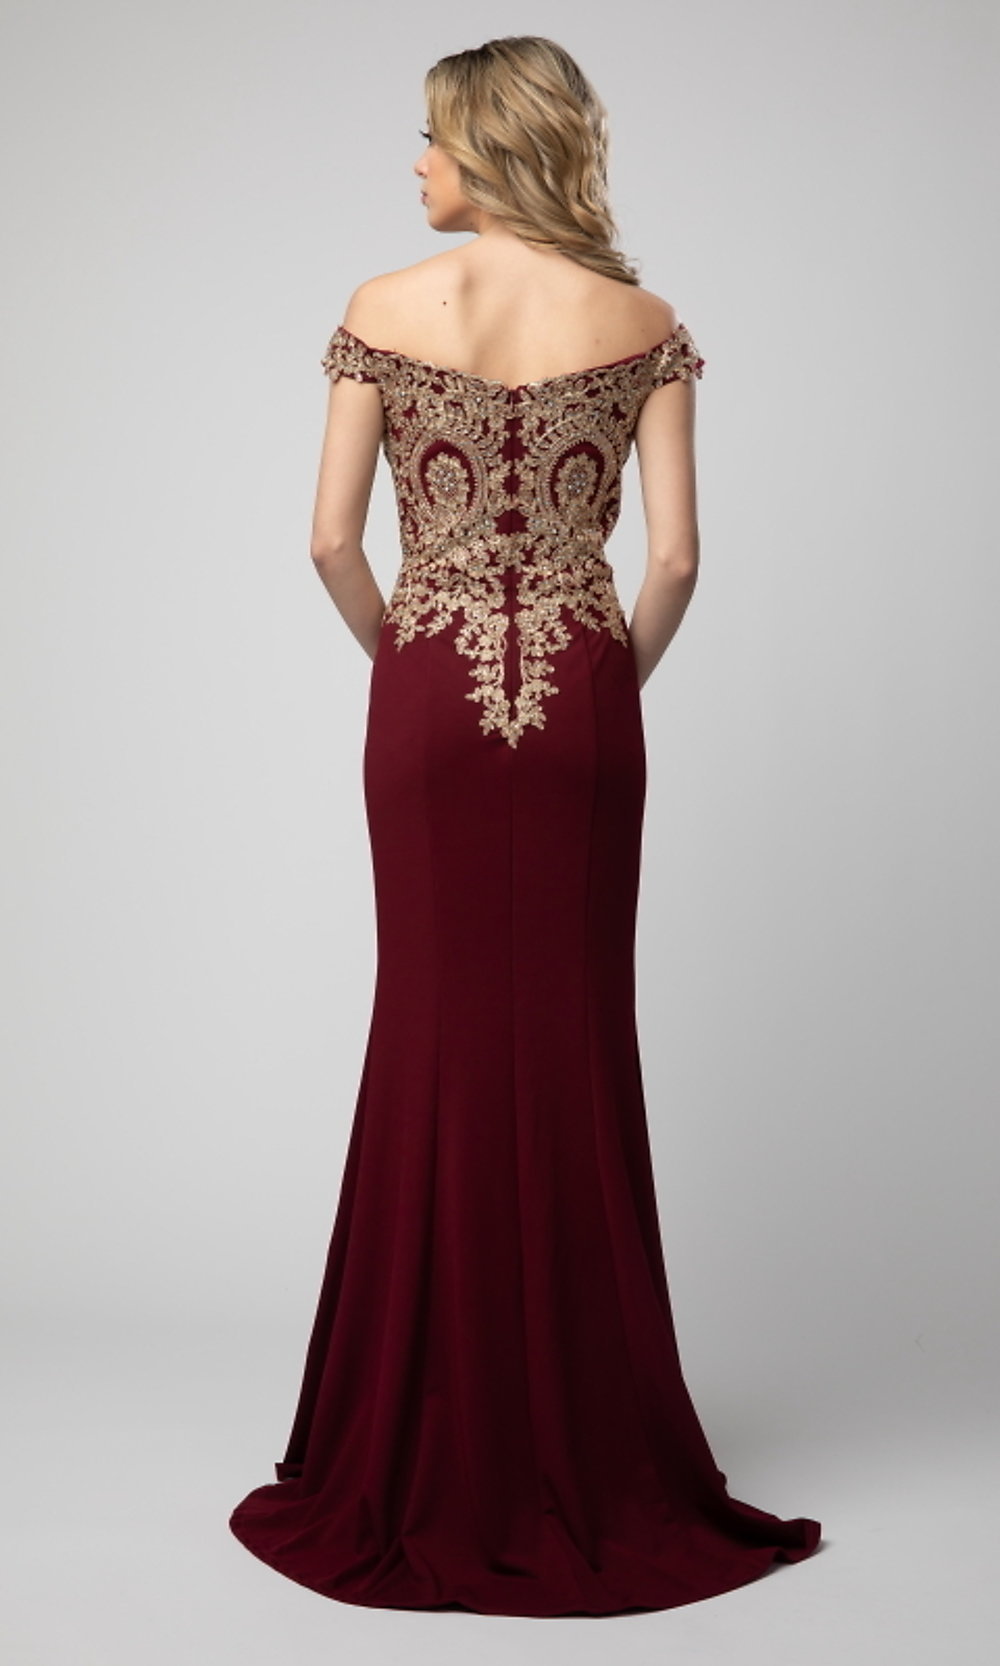 Long Off-the-Shoulder Prom Dress with Embroidery